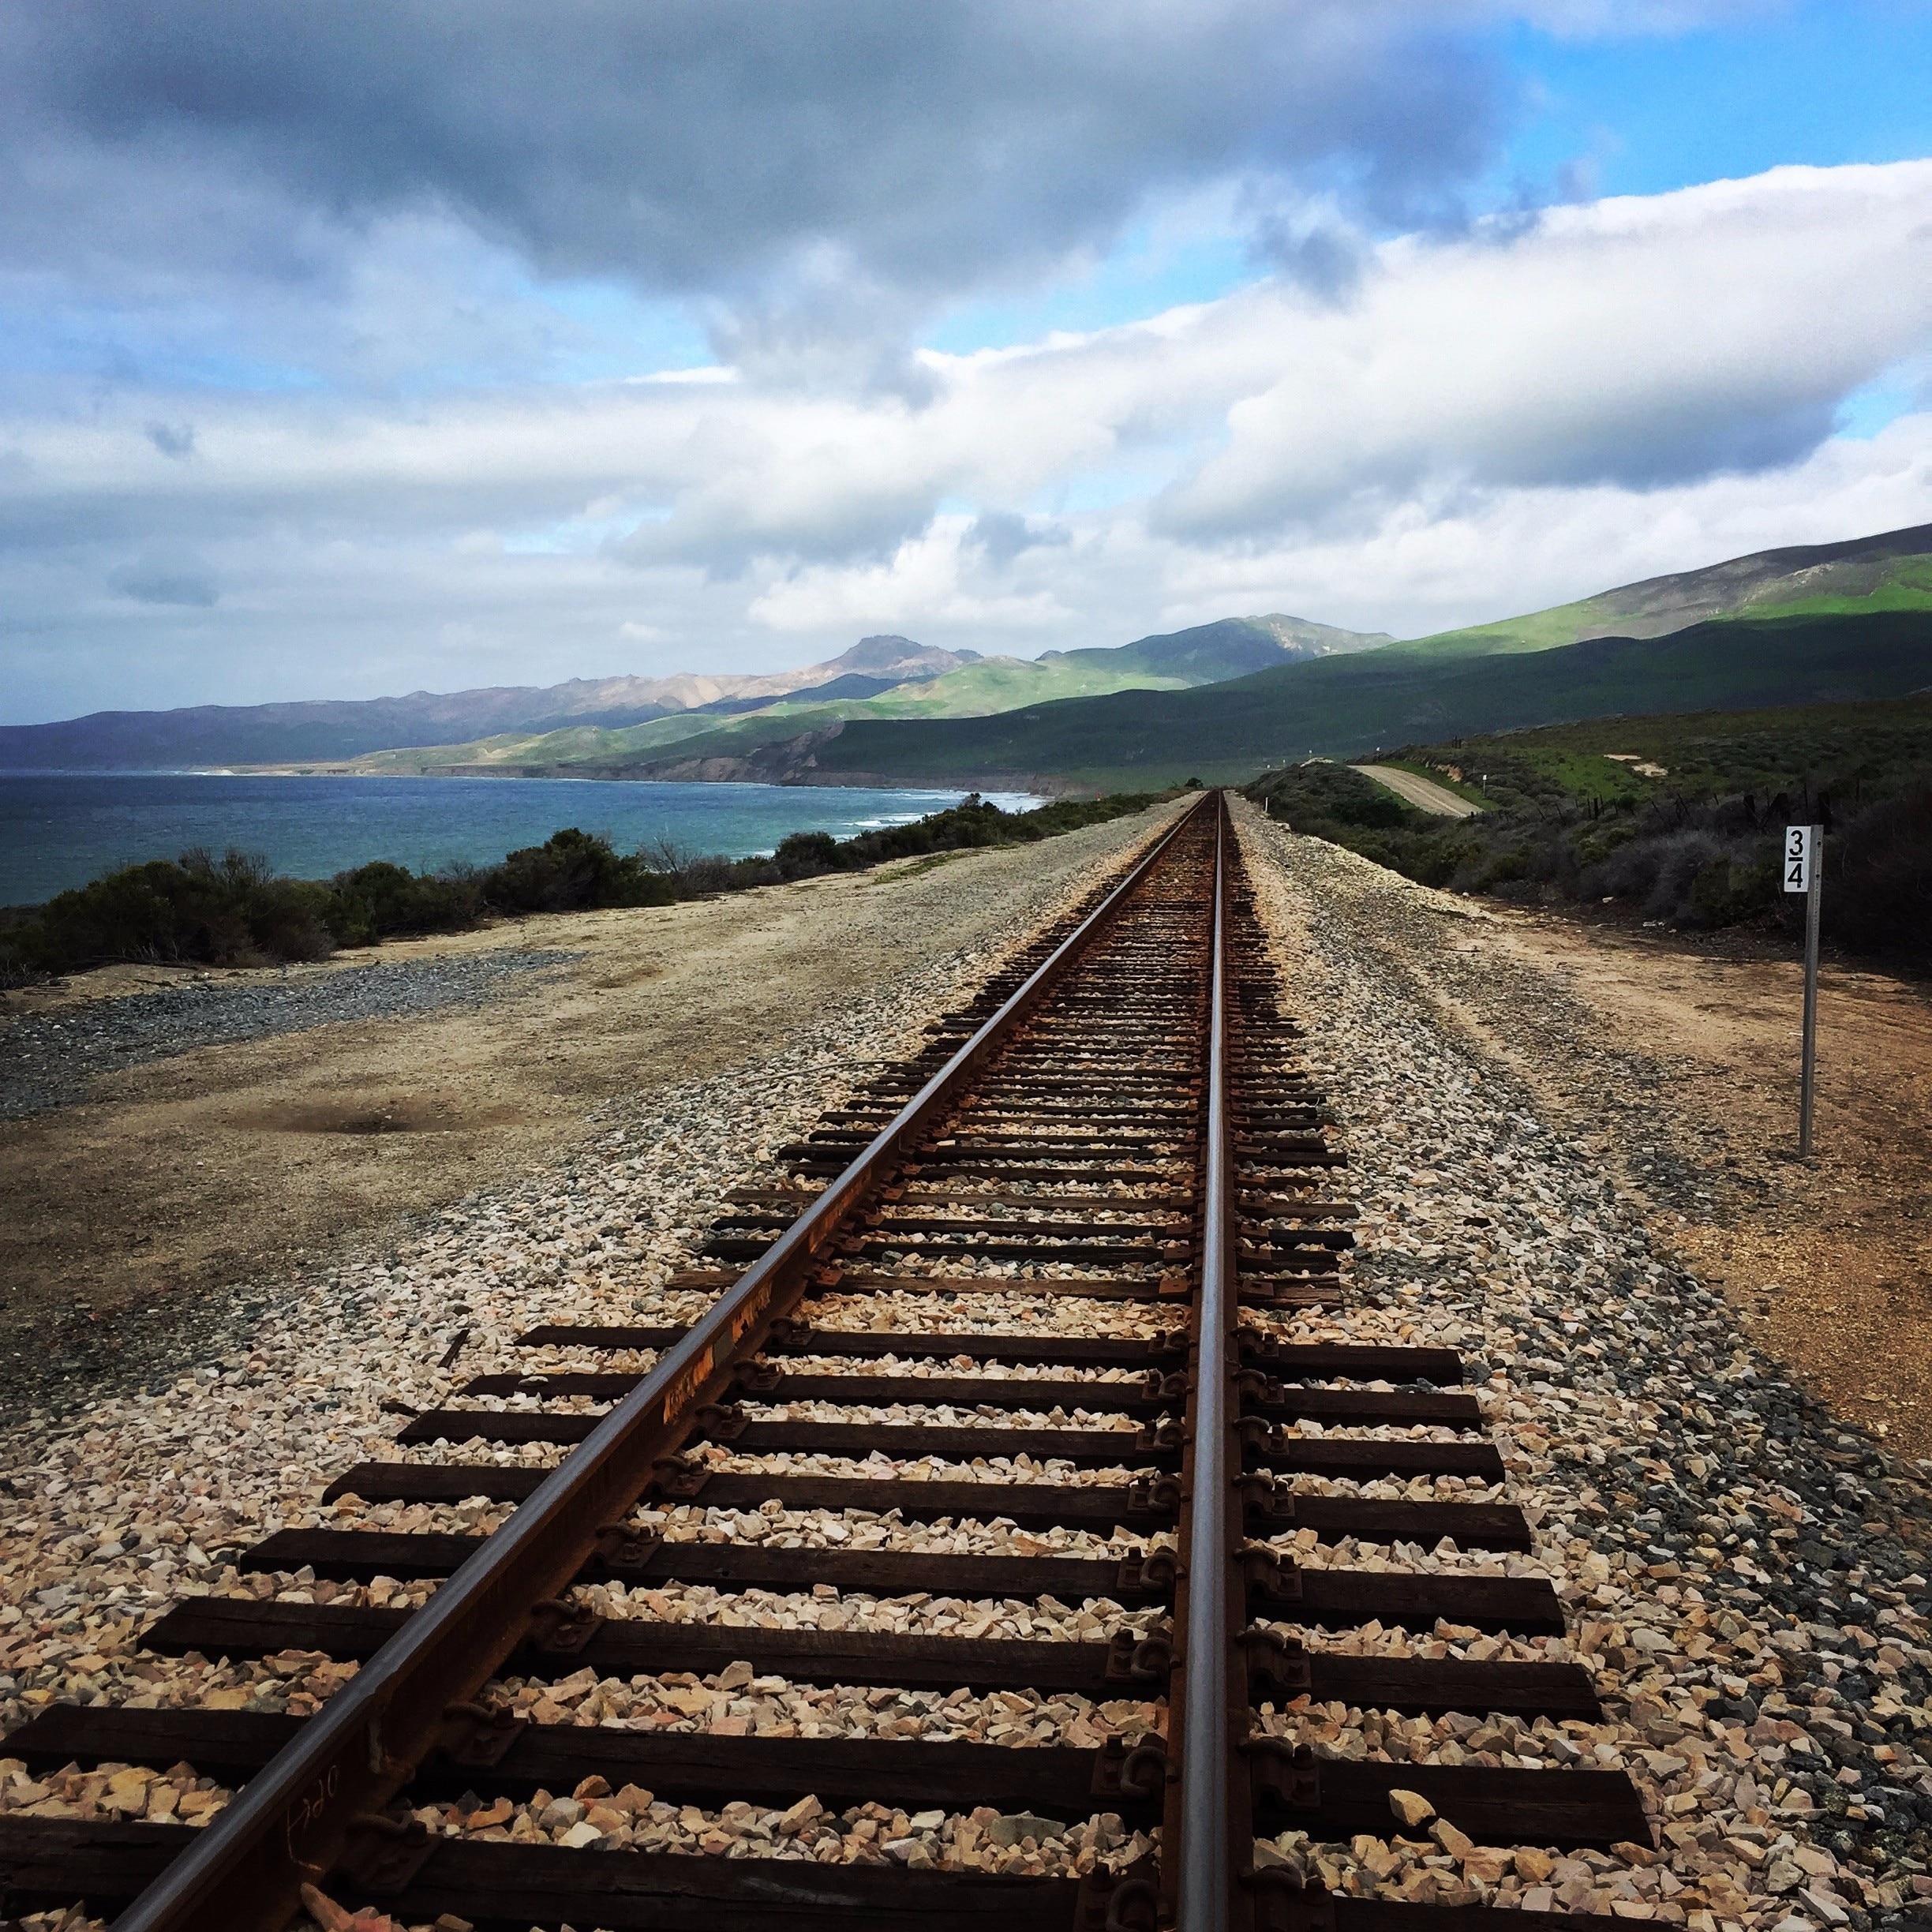 Just an hour drive from Santa Barbara and a 45-minute drive from Lompoc, you'll find spectacular landscapes like this one. A sign 4.5 miles south of Lompoc off Highway 1 will direct you onto Jalama Road. Follow this scenic, winding, 14.5 mile road to the coast. You'll cross these railroad tracks before heading into Jalama Beach County Park.

#lifeatexpedia
#roadtrip
#California
#lifeatexpedia
#weloveourmarkets
#AMER